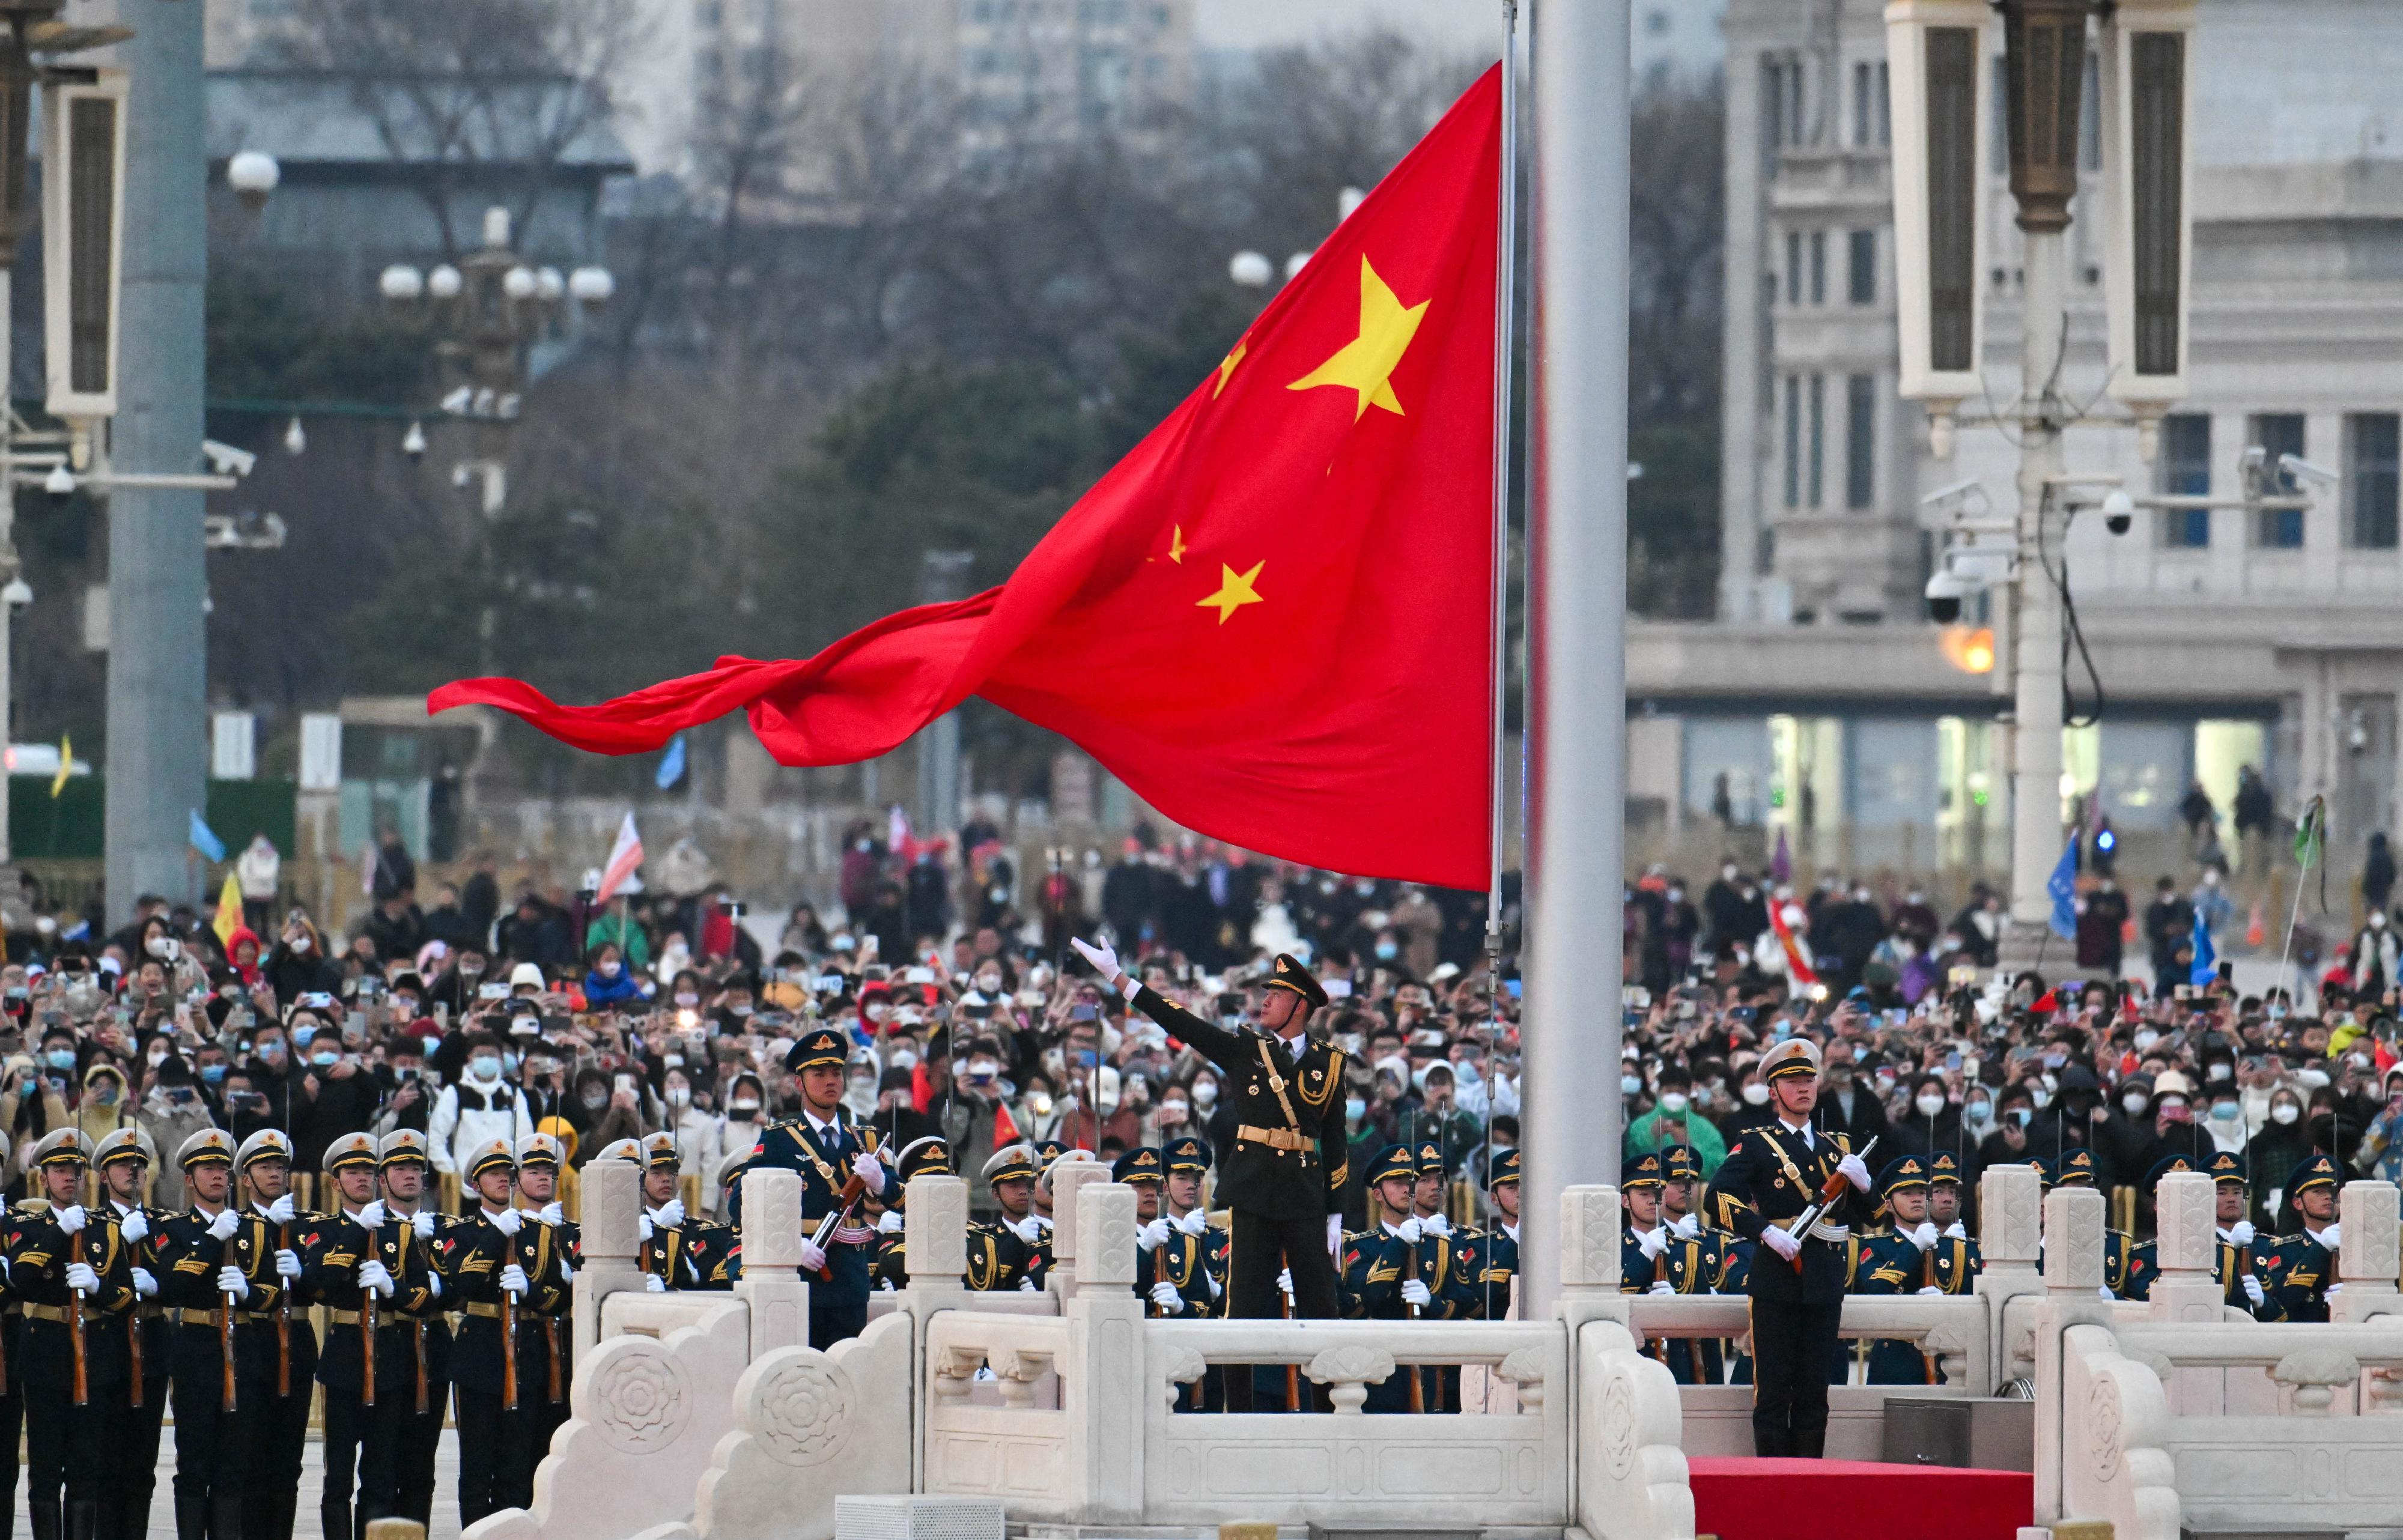 The Chief Executive, Mr John Lee, attends the flag-raising ceremony at Tiananmen Square in Beijing today (March 17).